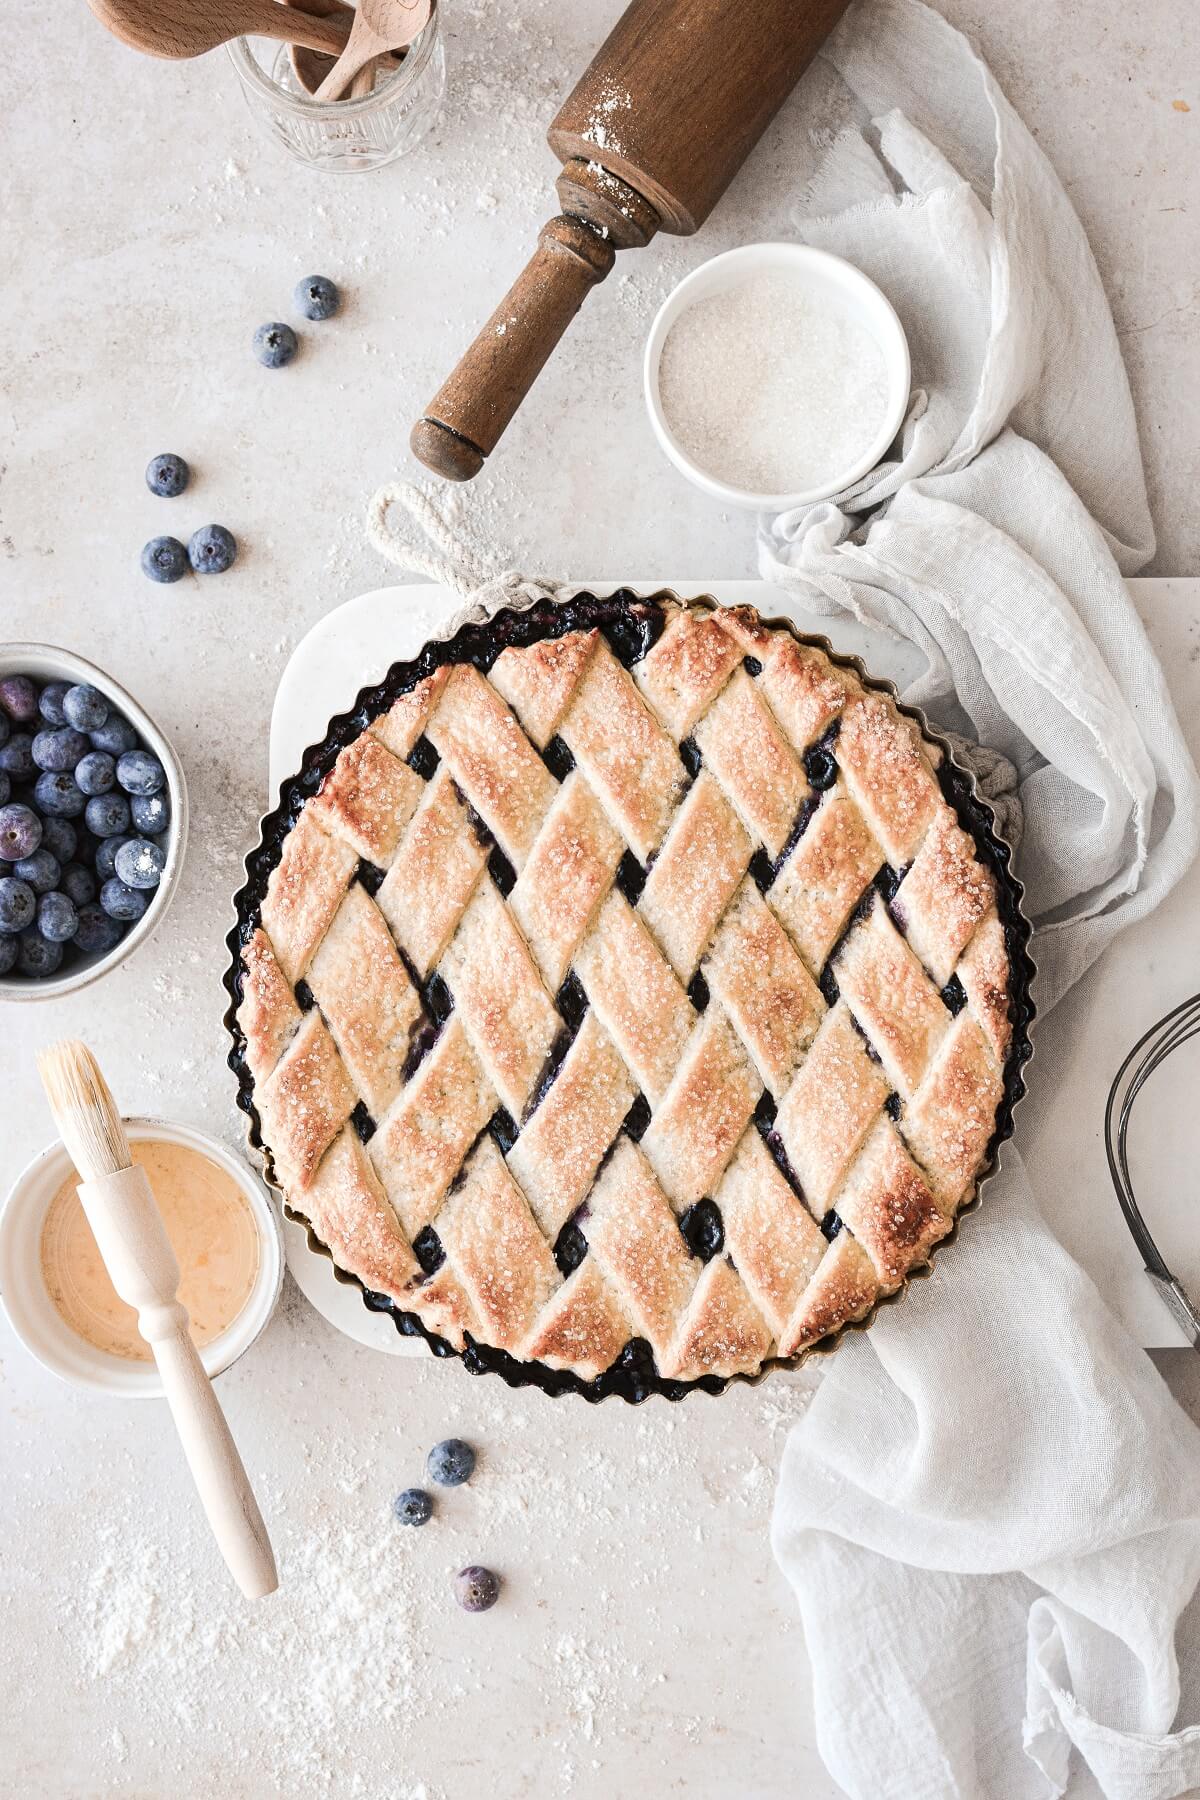 A blueberry lattice pie on a marble board.